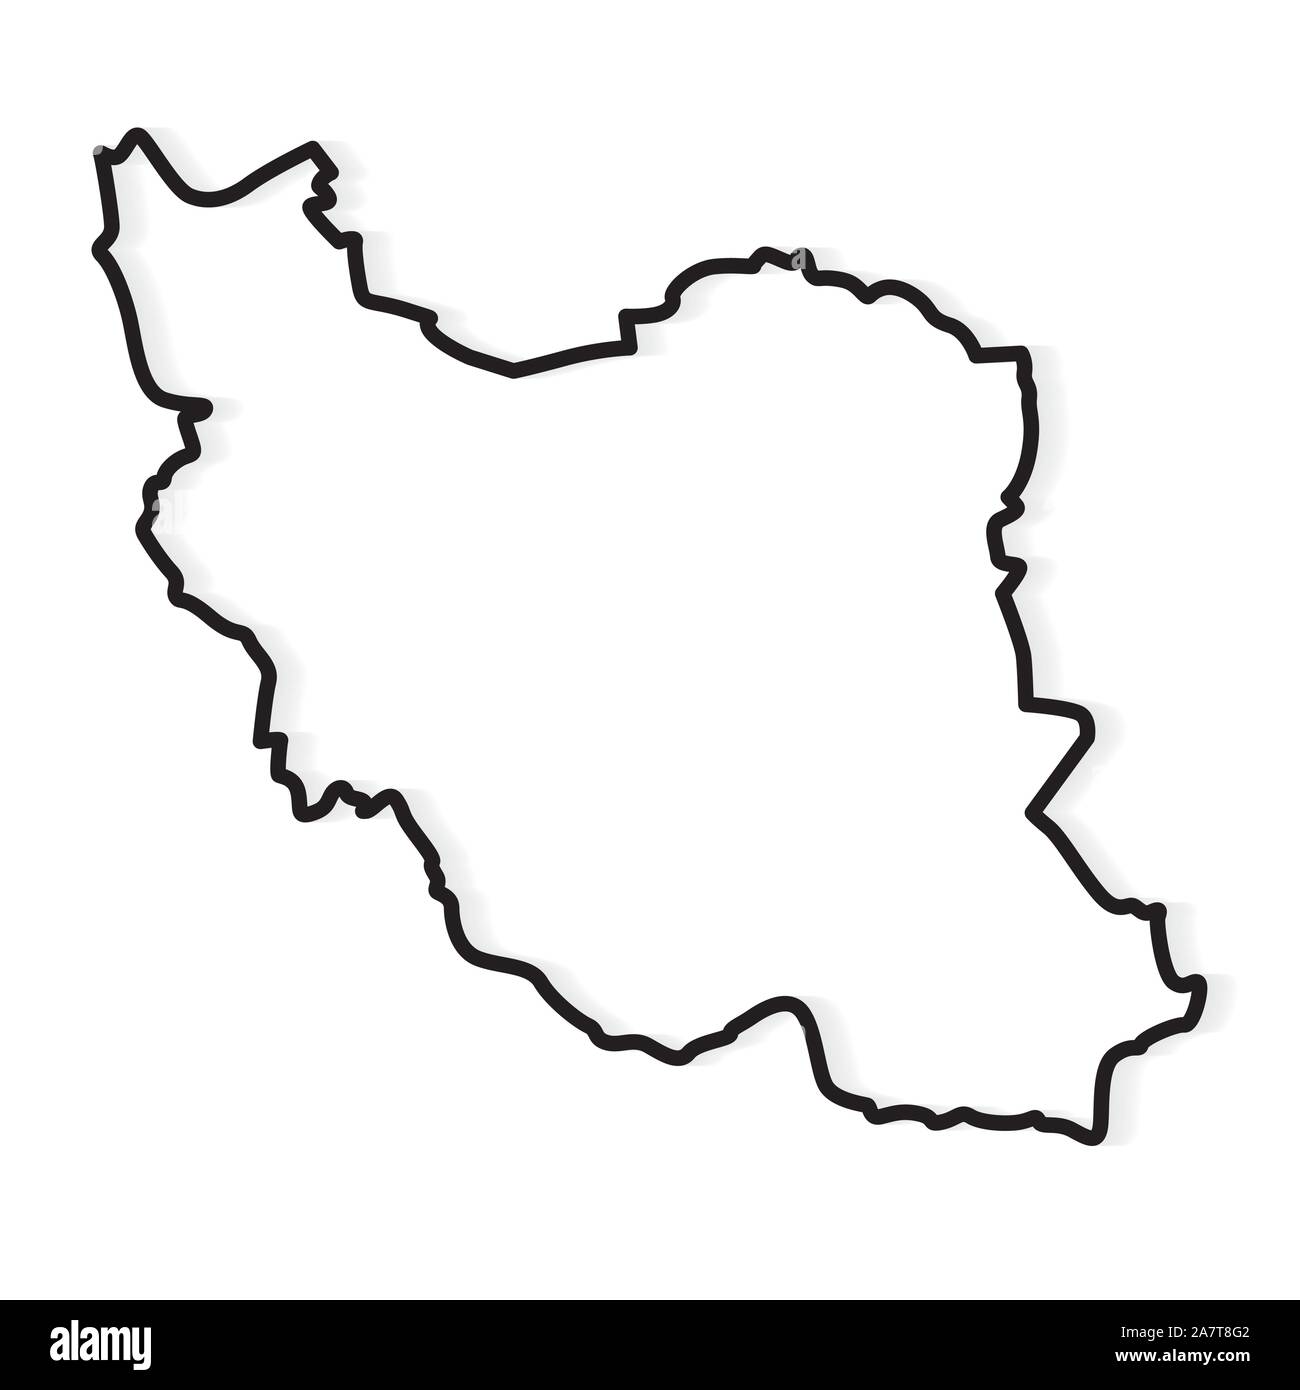 black abstract outline of Iran map- vector illustration Stock Vector